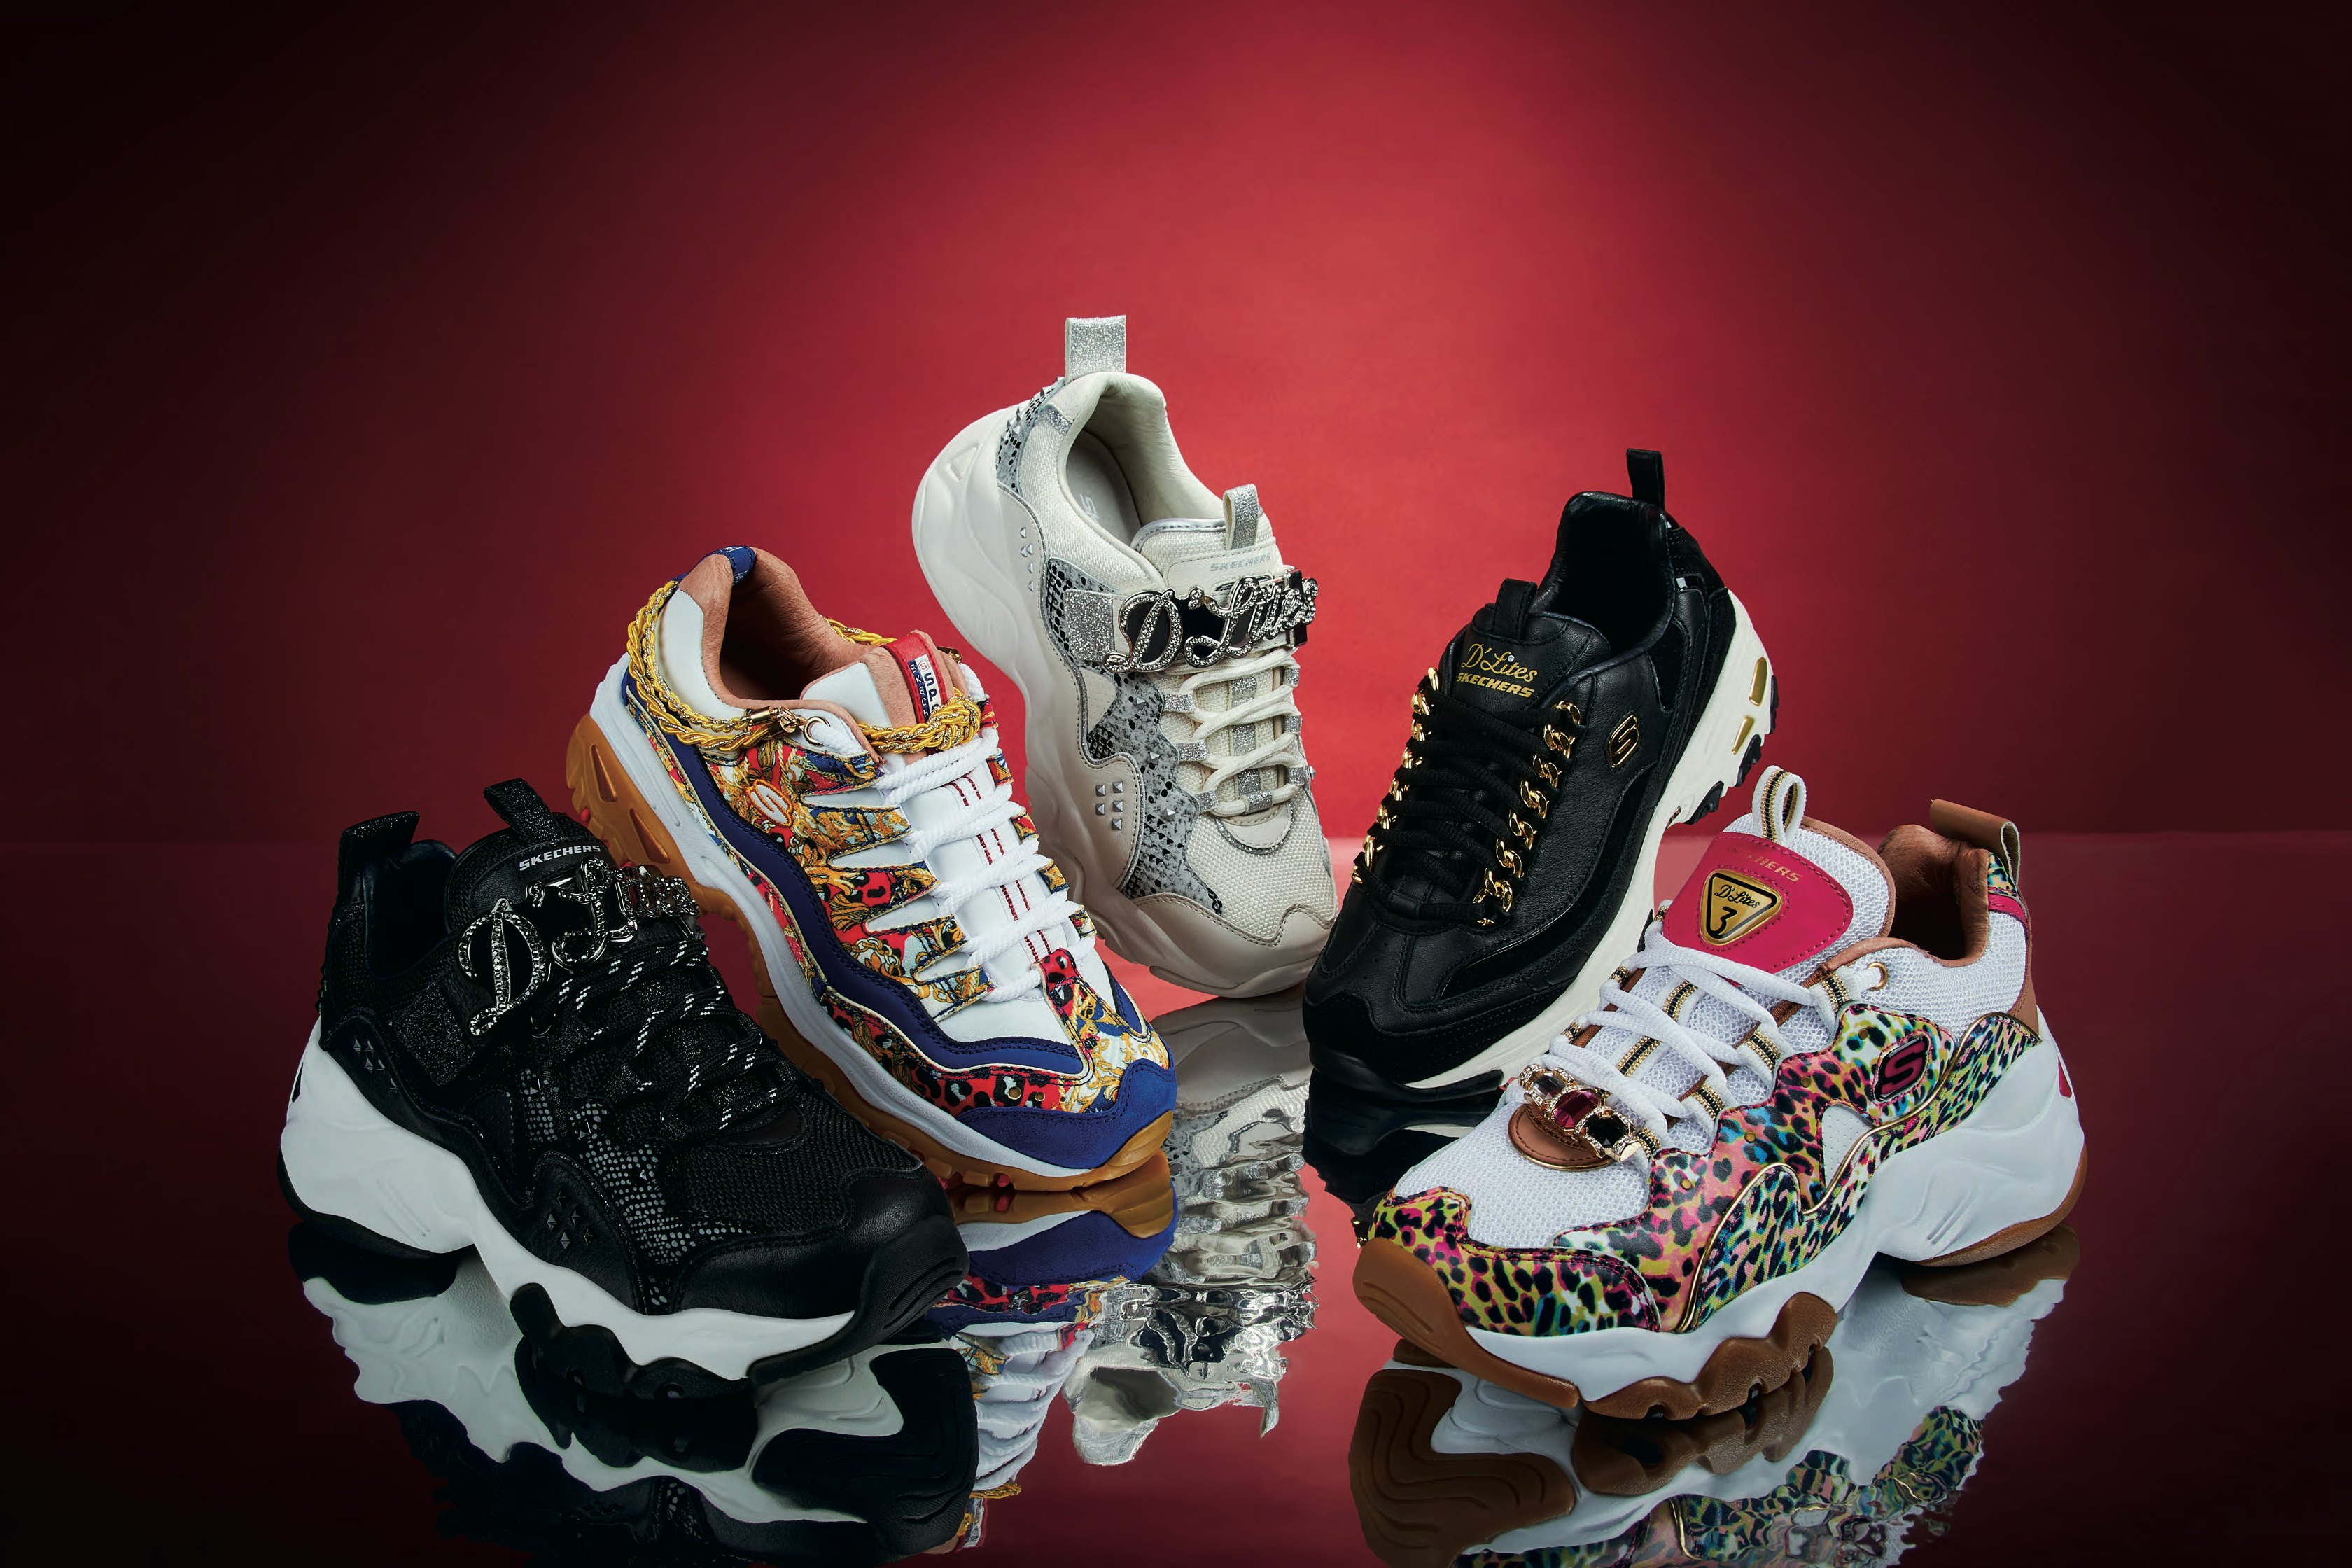 skechers shoes latest collection